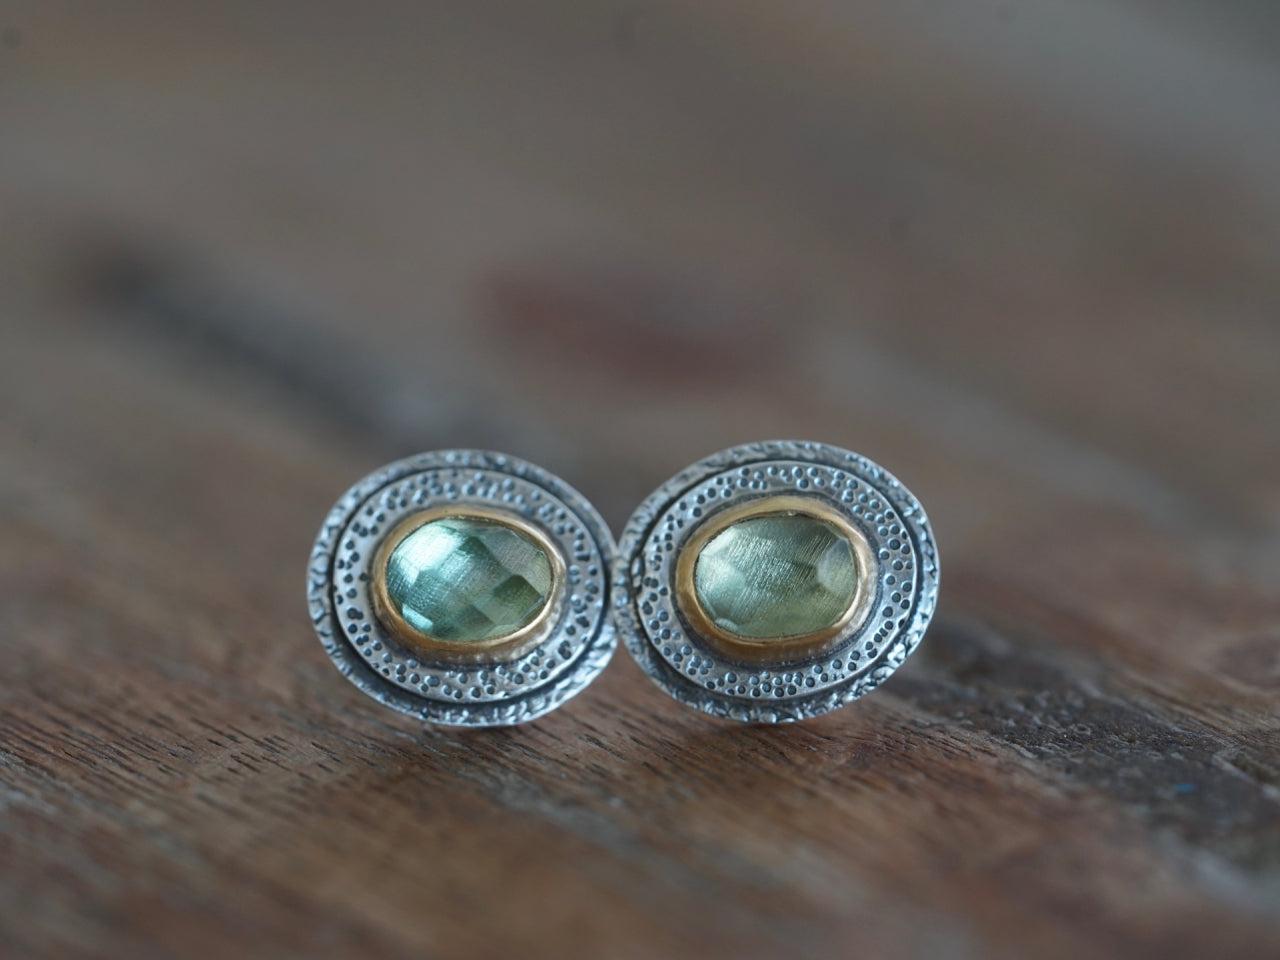 Green tourmaline and 22k gold post earrings